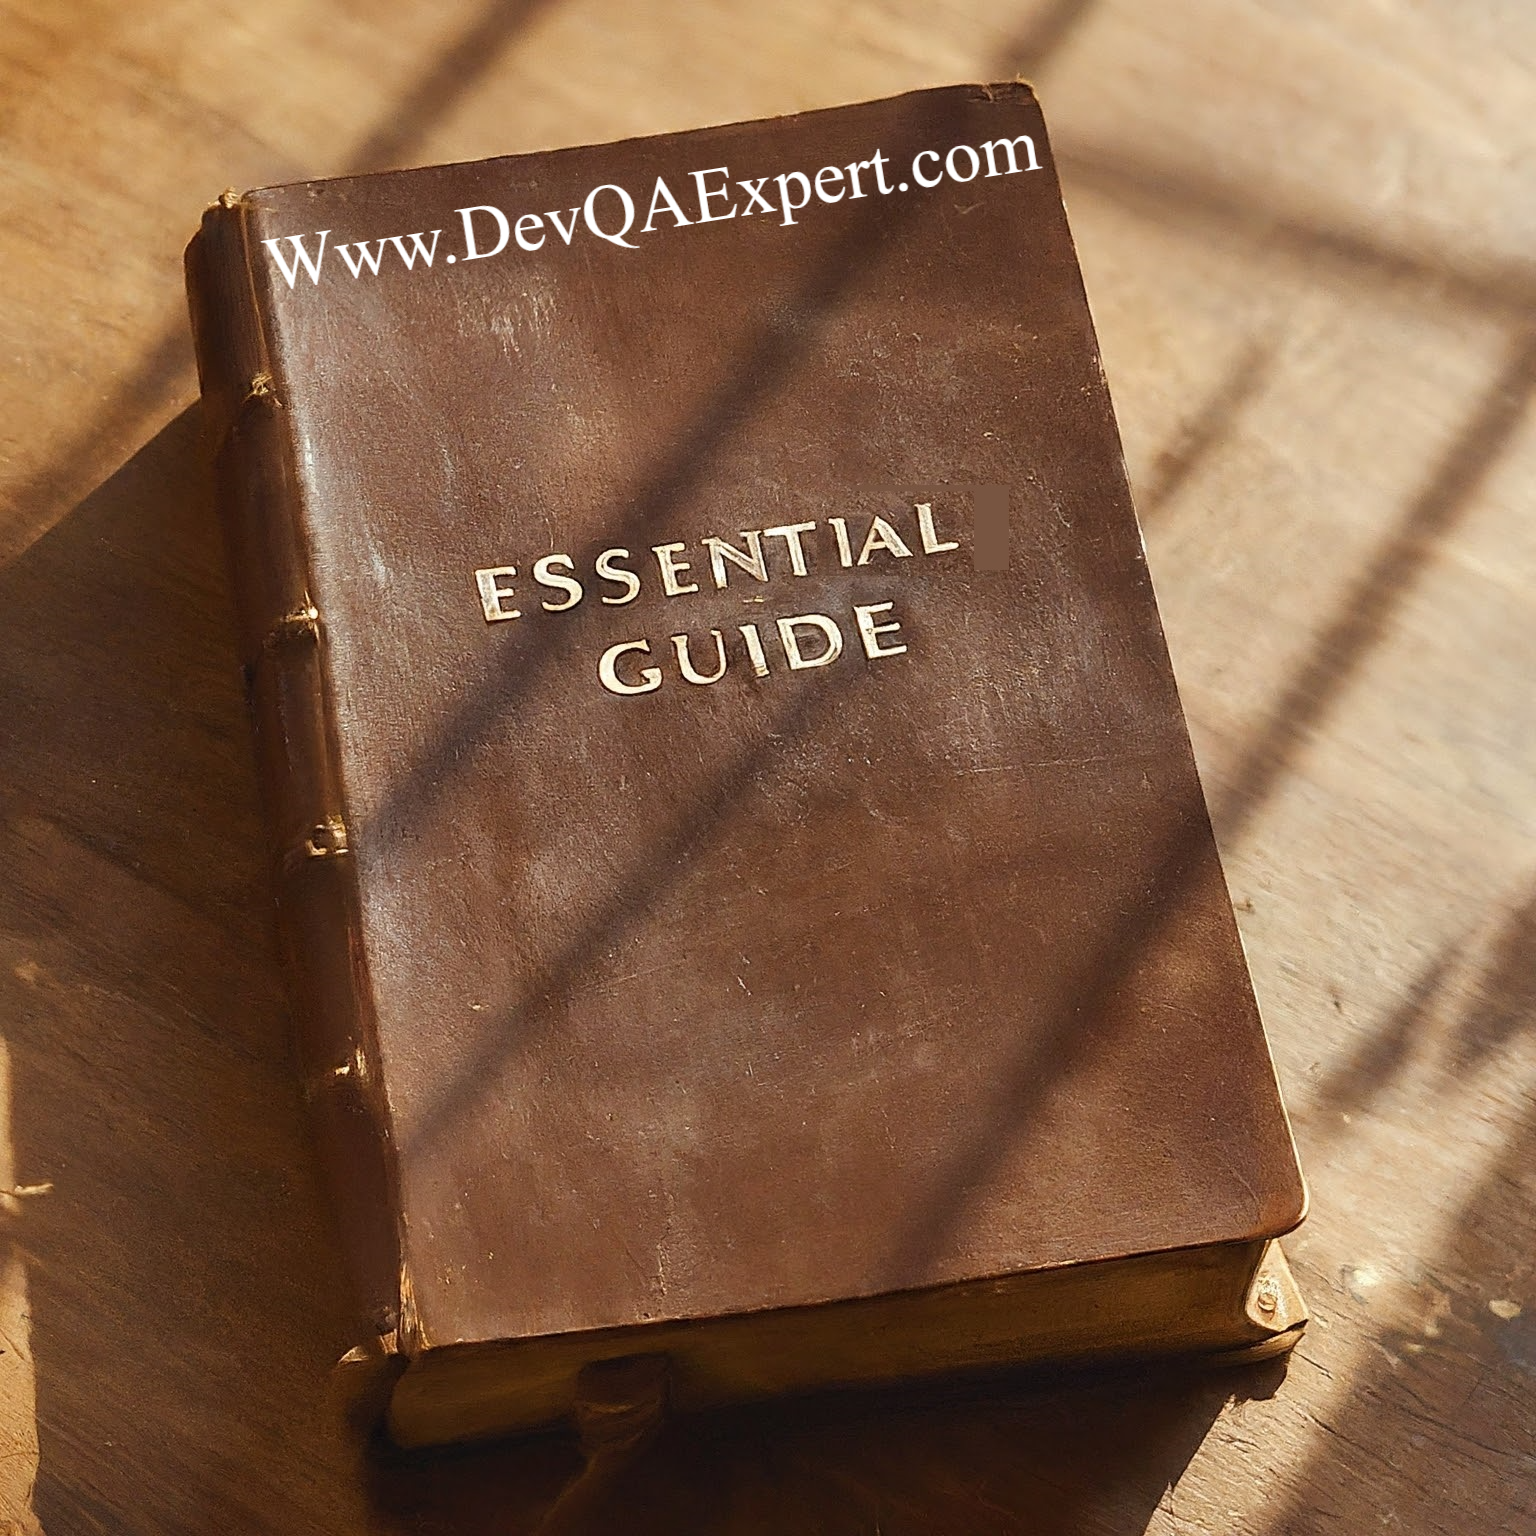 Essential guide for tester